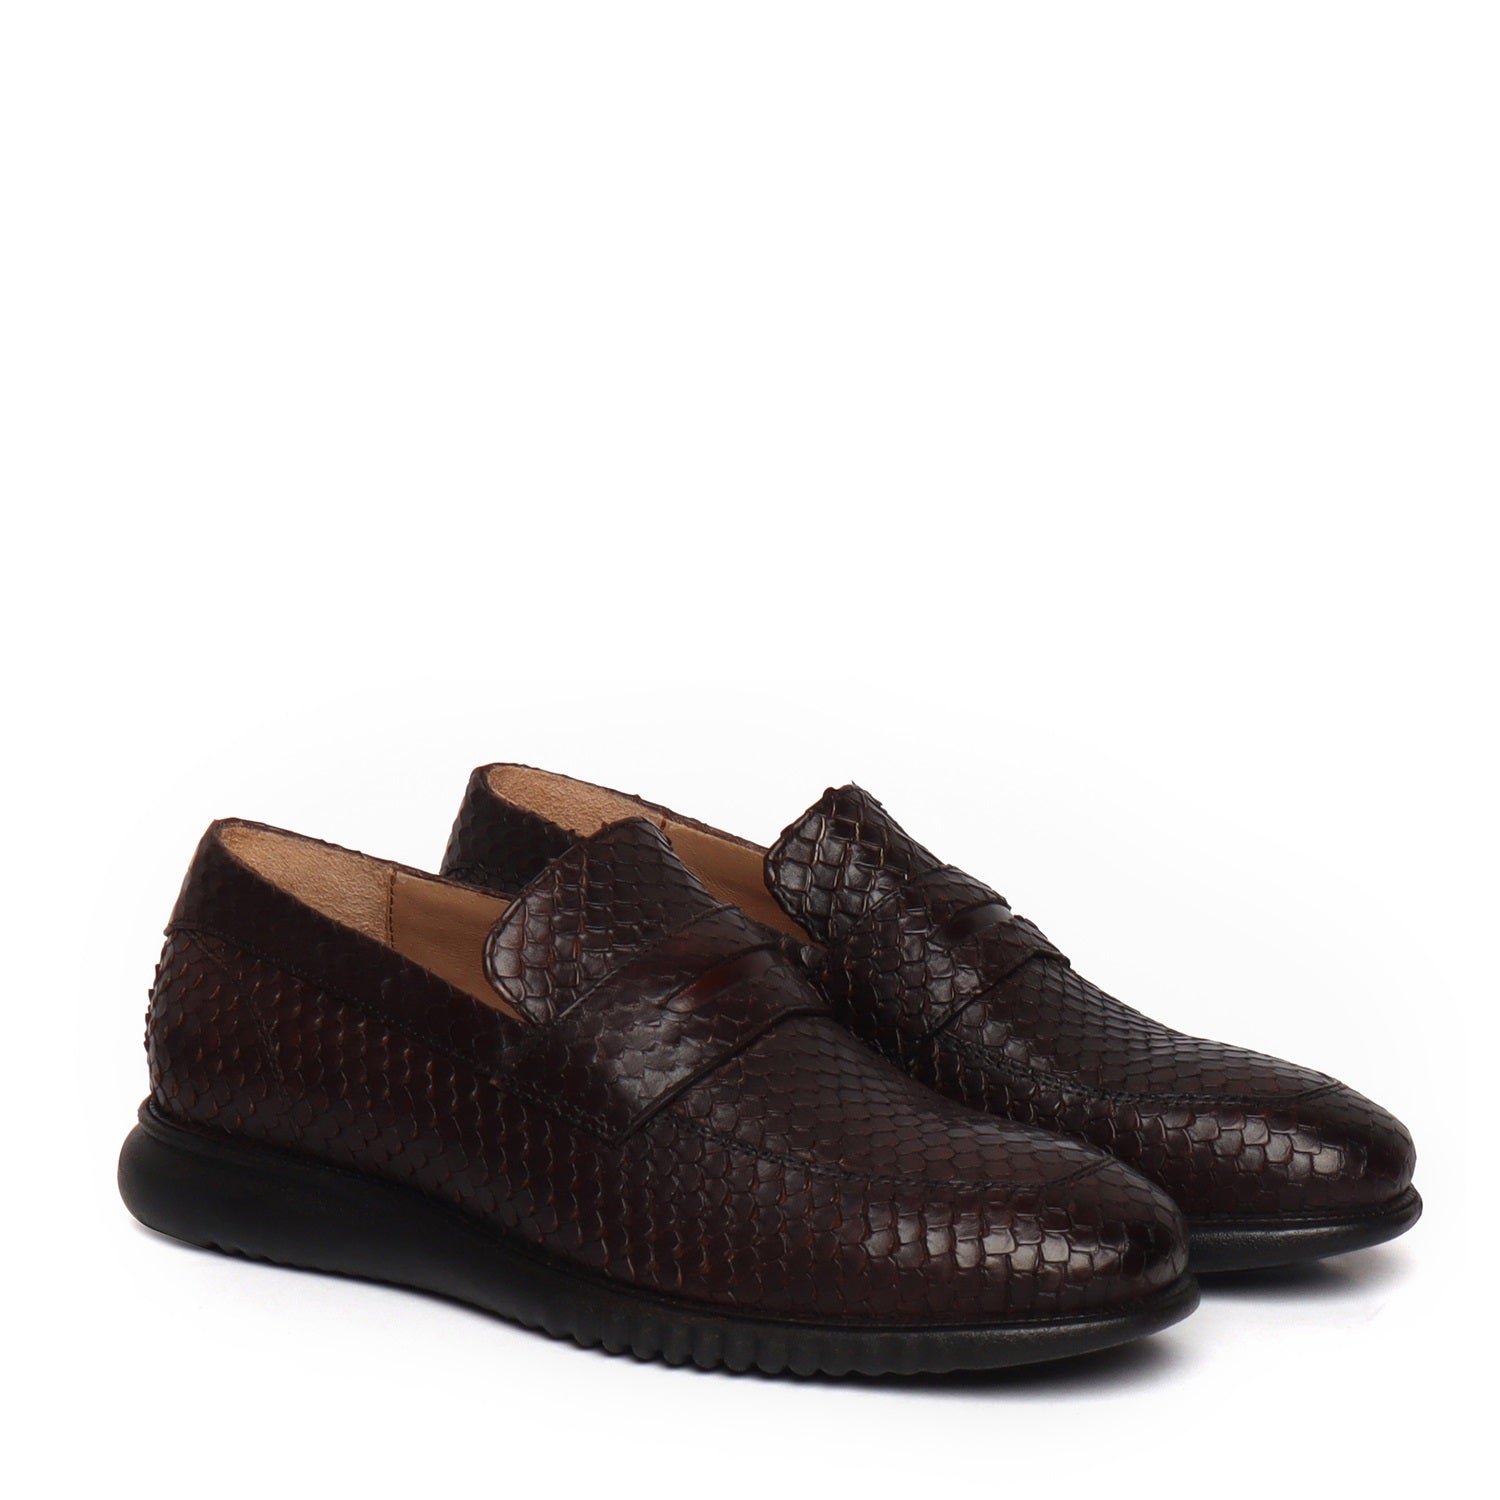 Super Flexible Brown Leather Loafers With Snake Skin Textured